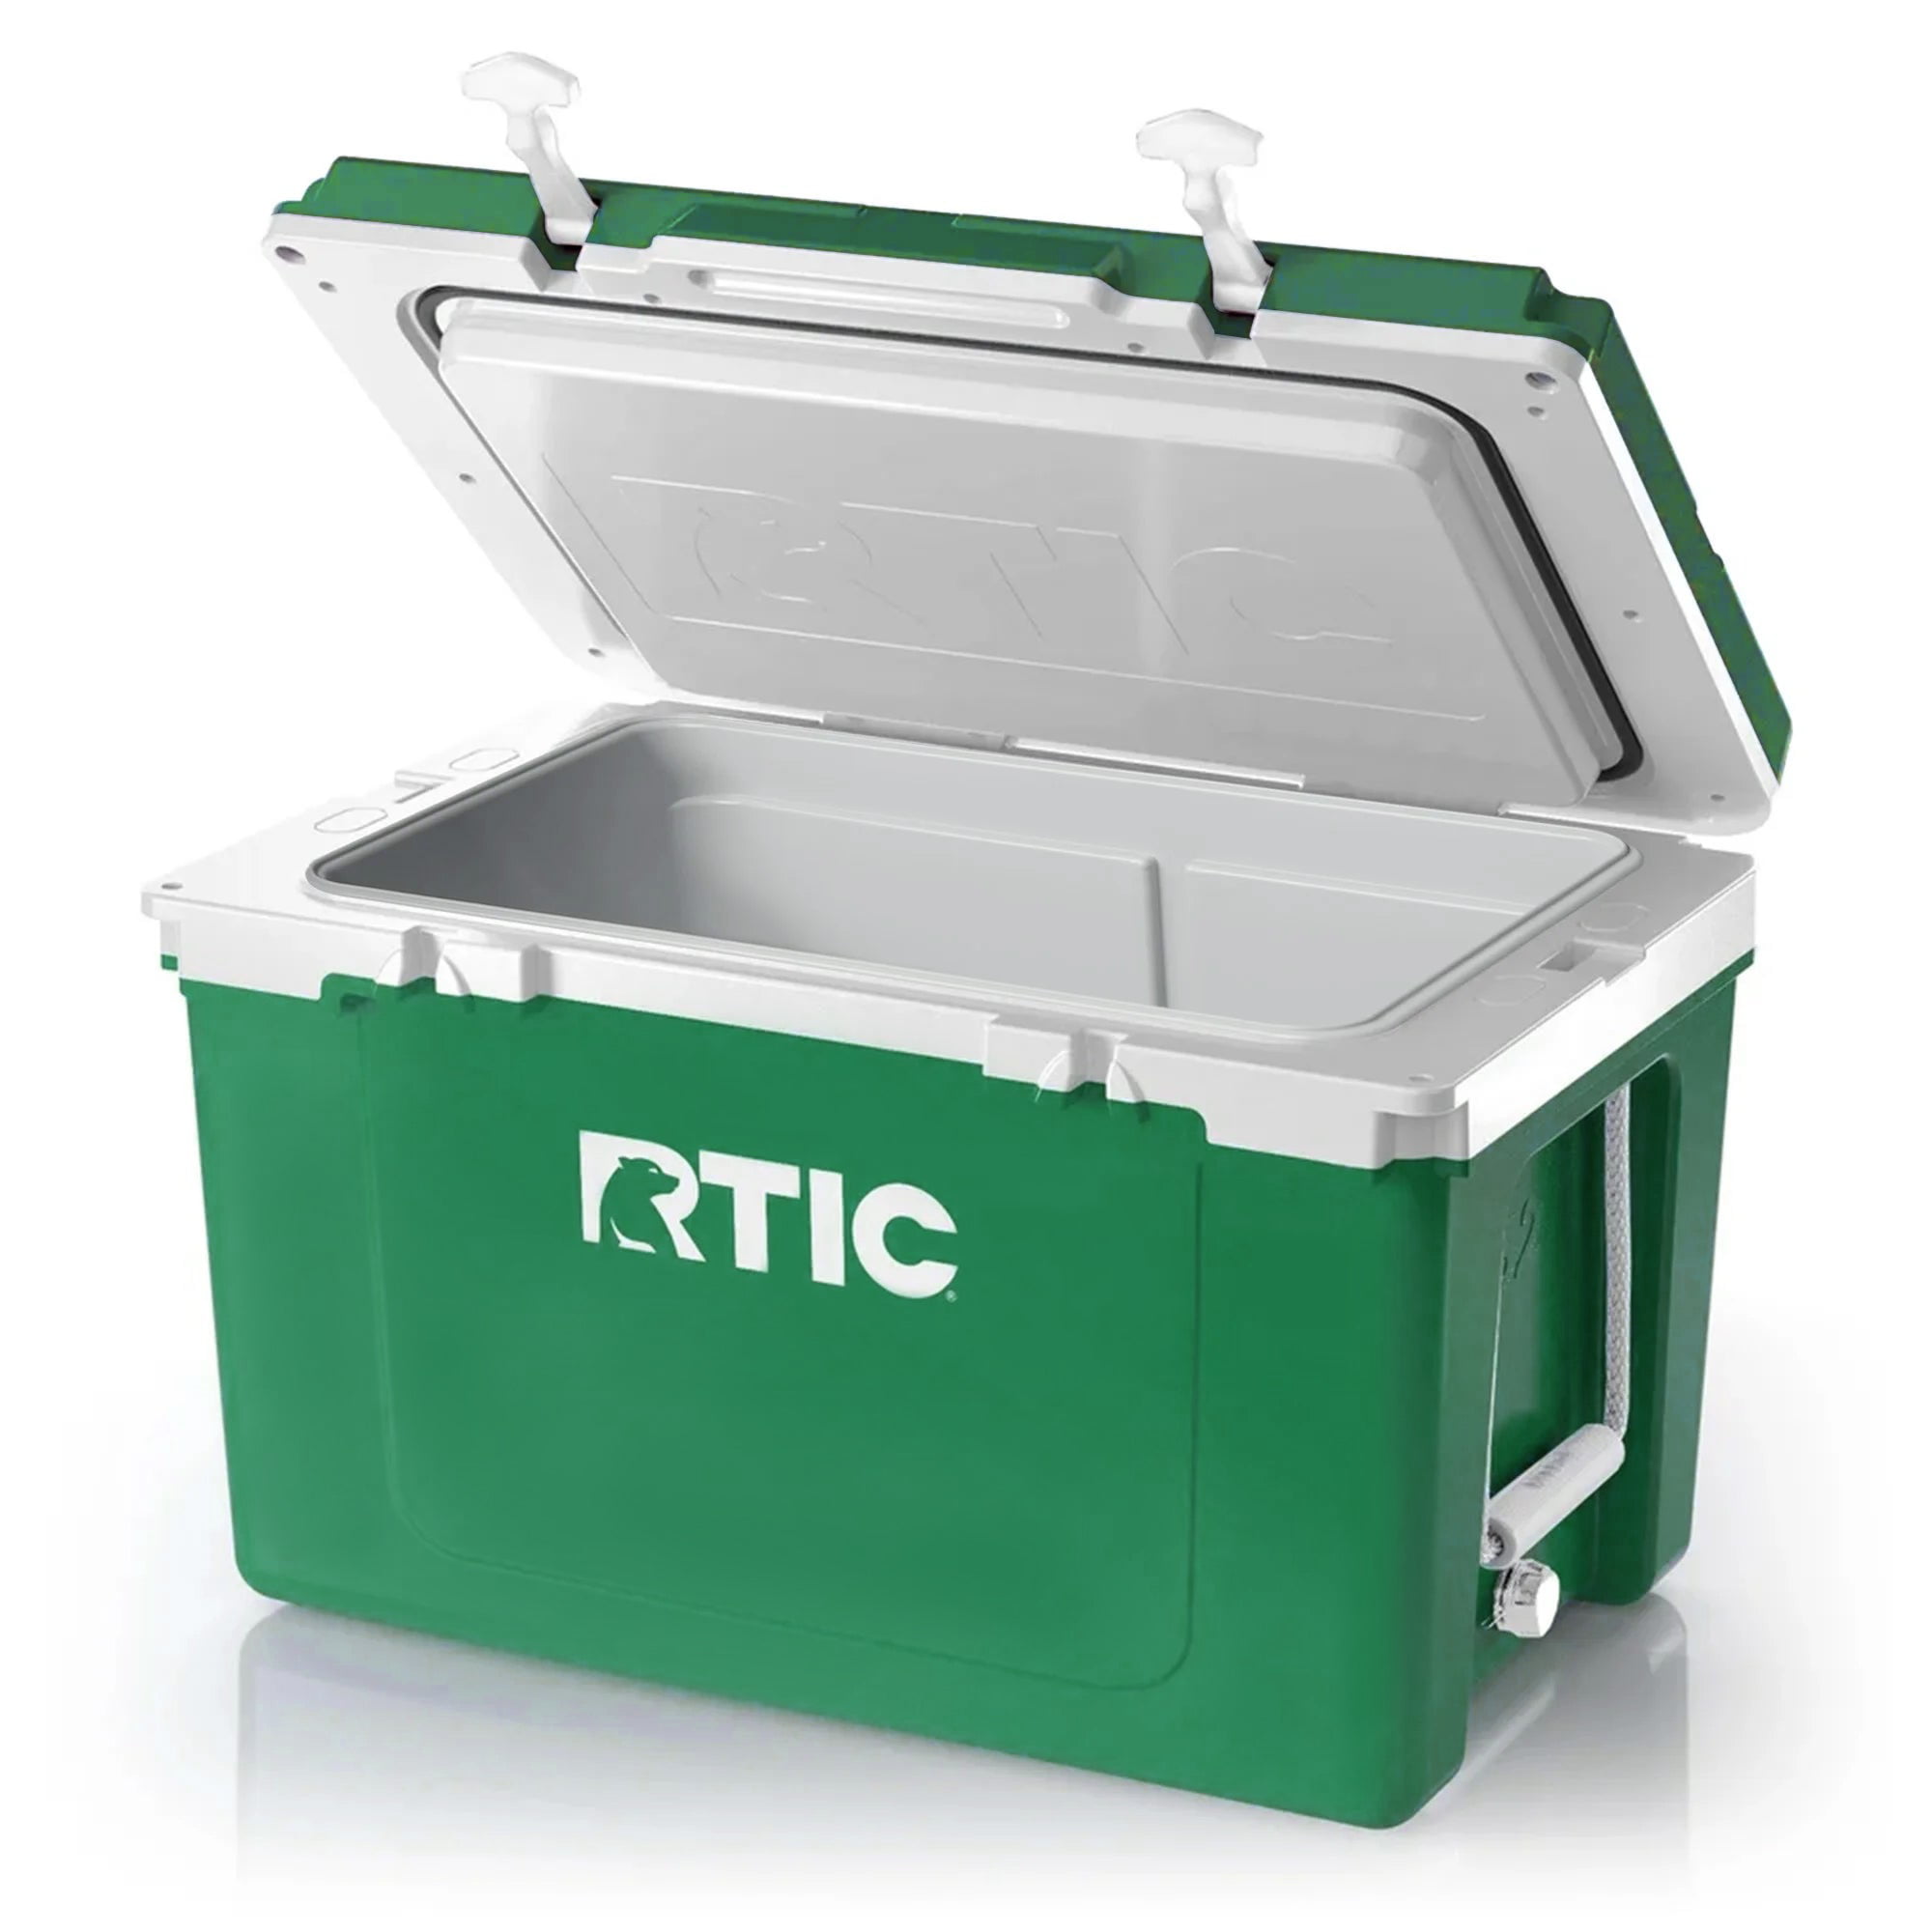 RTIC Ultra-Light 52 Quart Hard Cooler Insulated Portable Ice Chest 